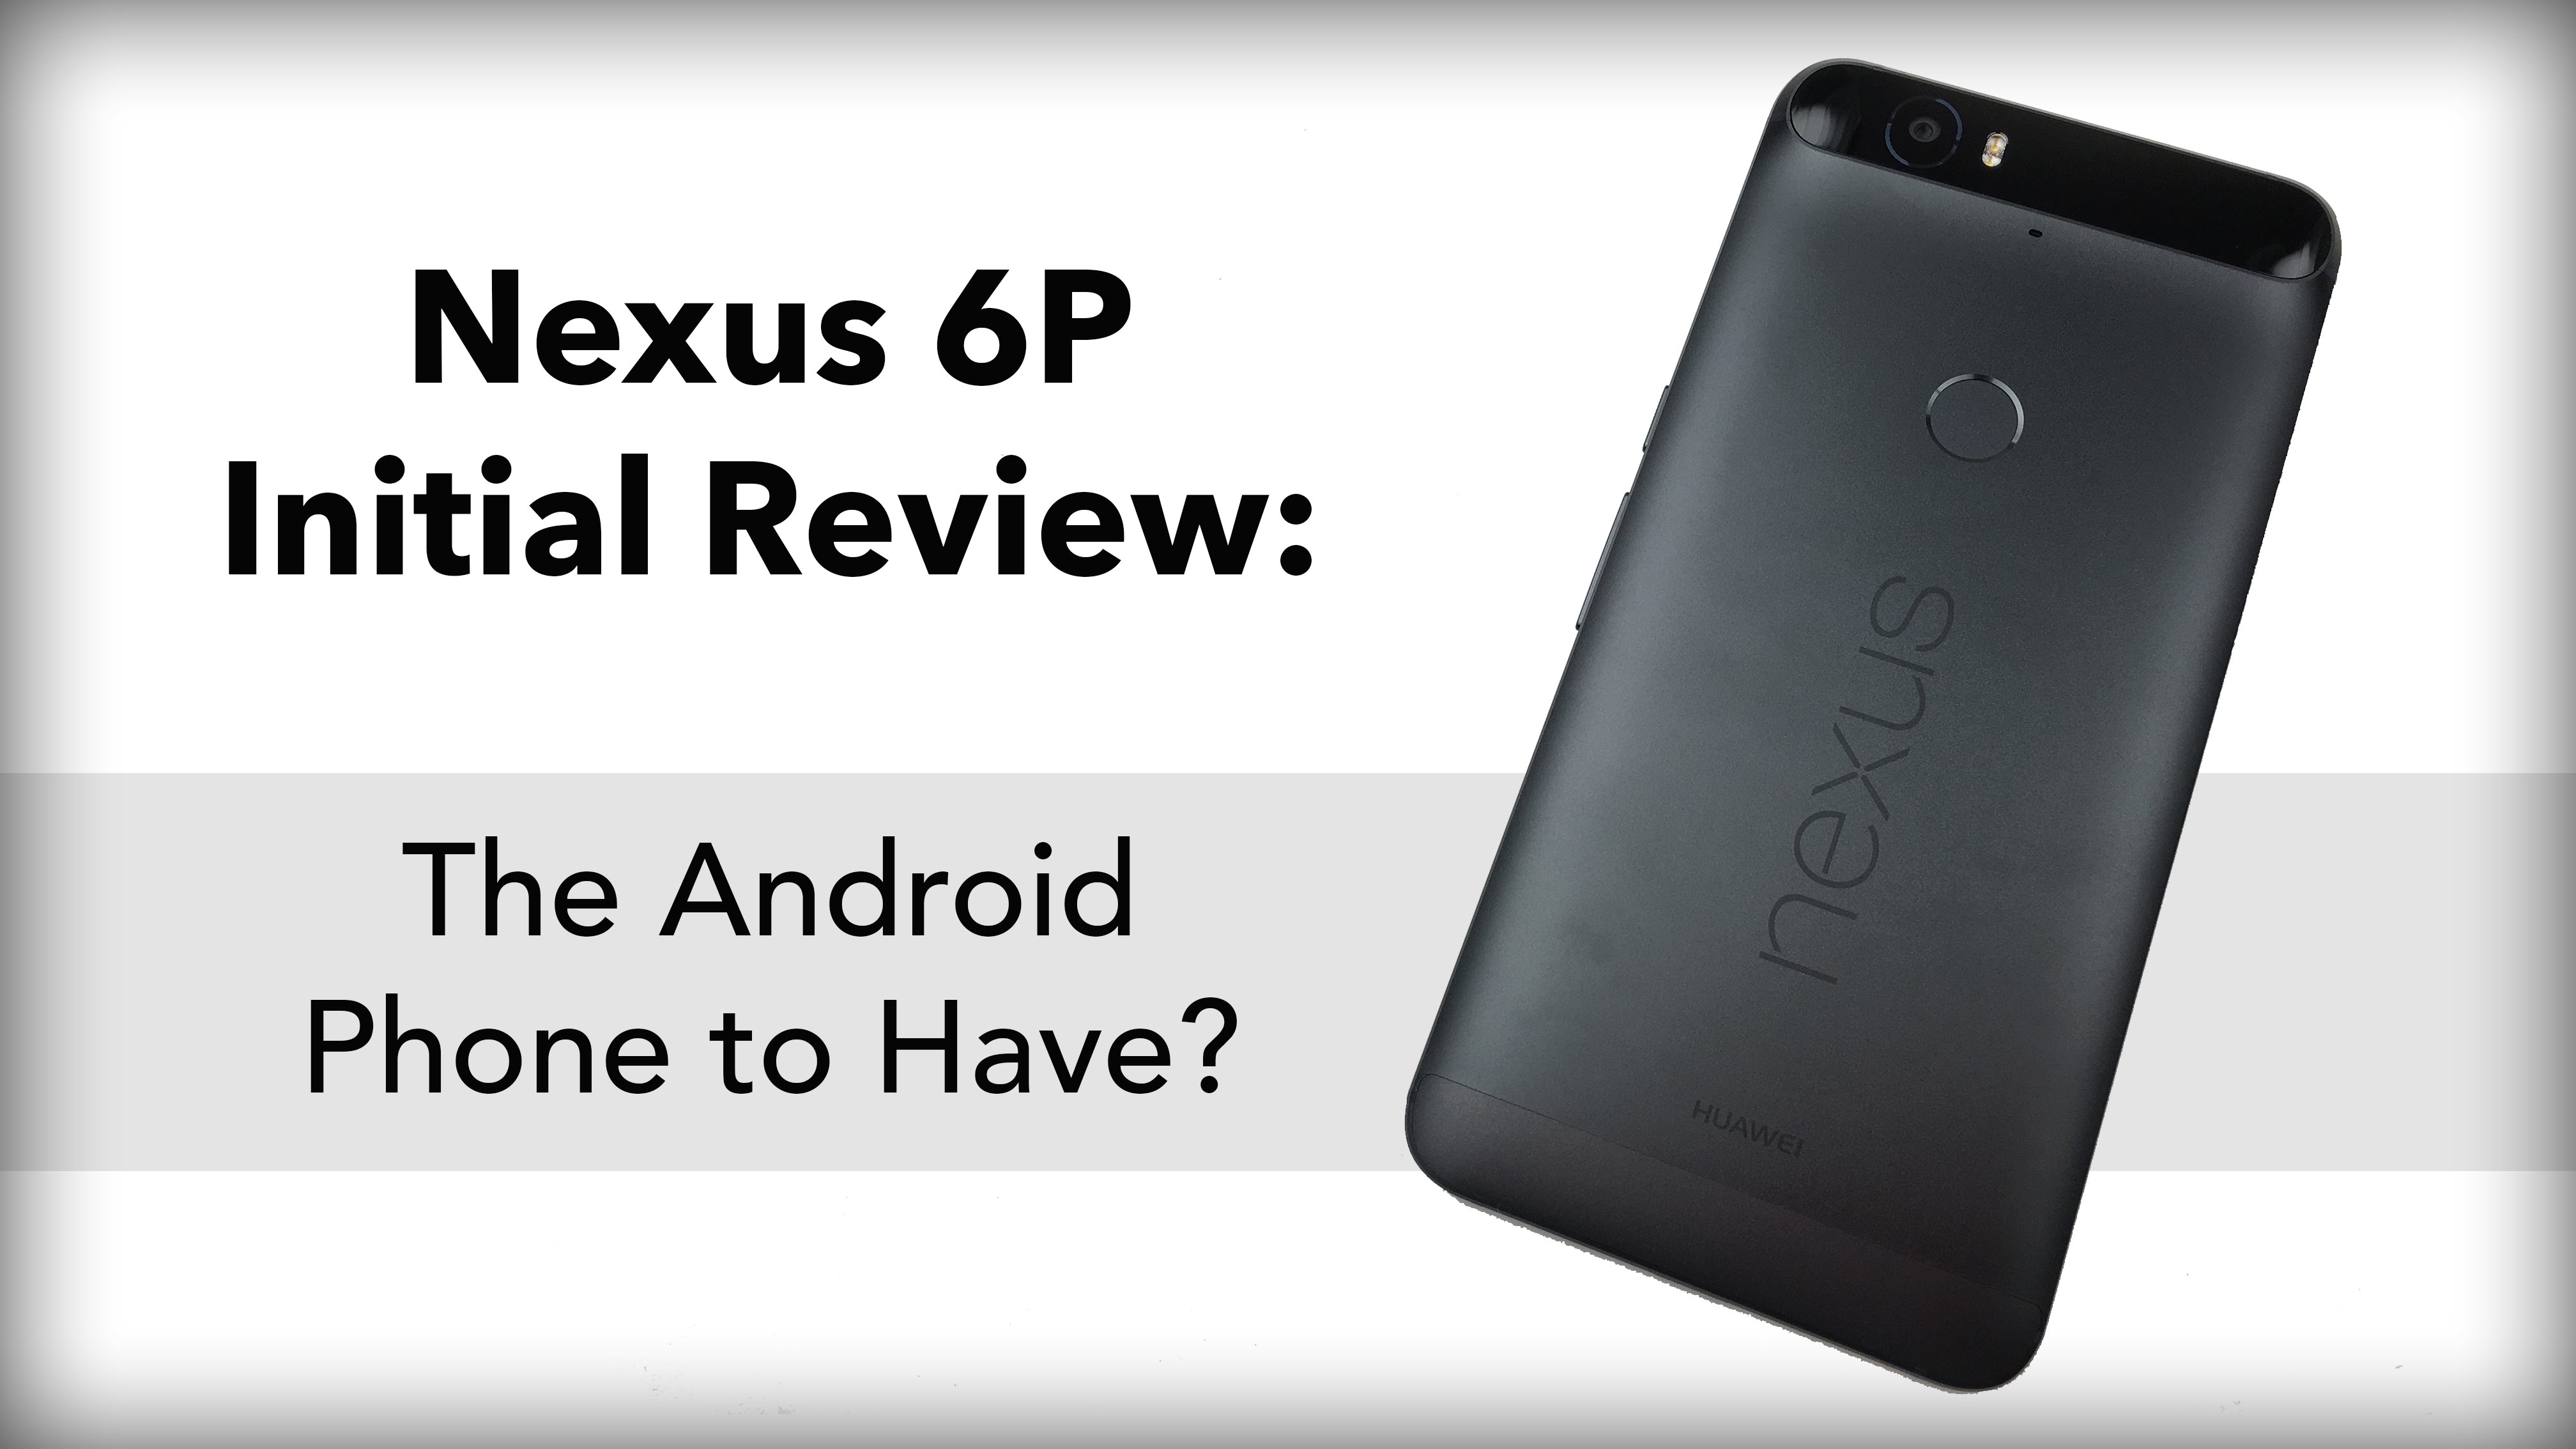 Nexus 6P Initial Review: The Android Phone to Have?